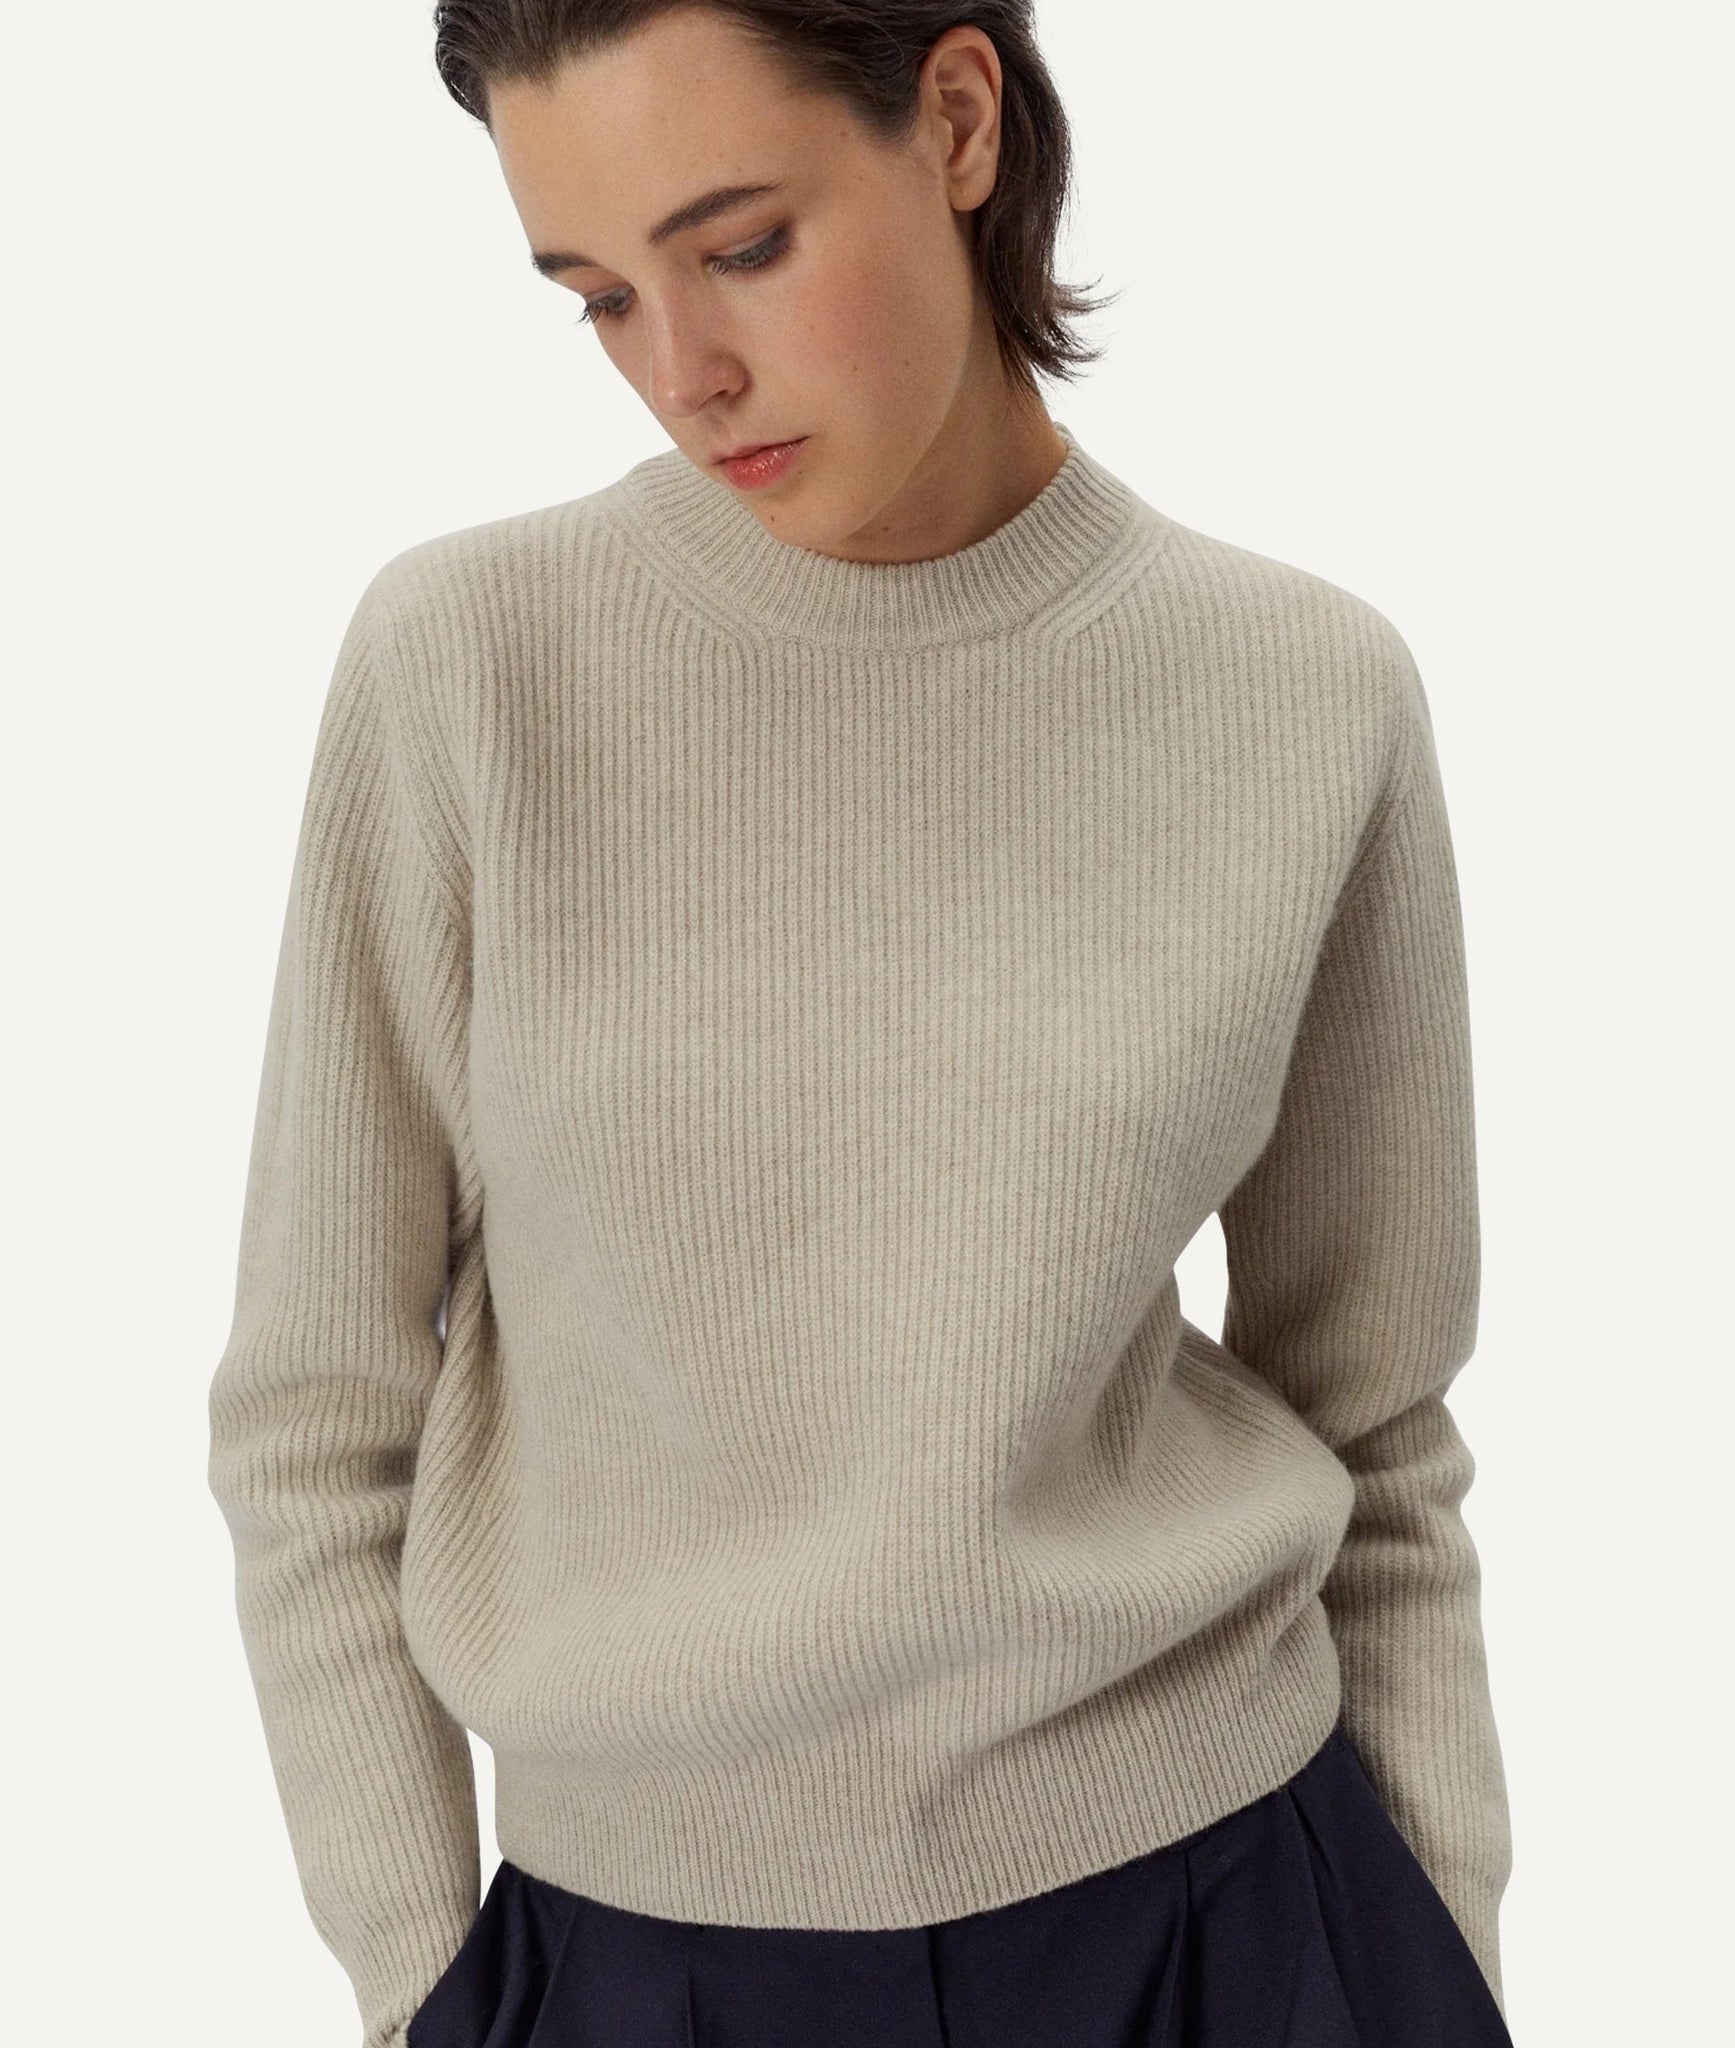 The Woolen Ribbed Sweater